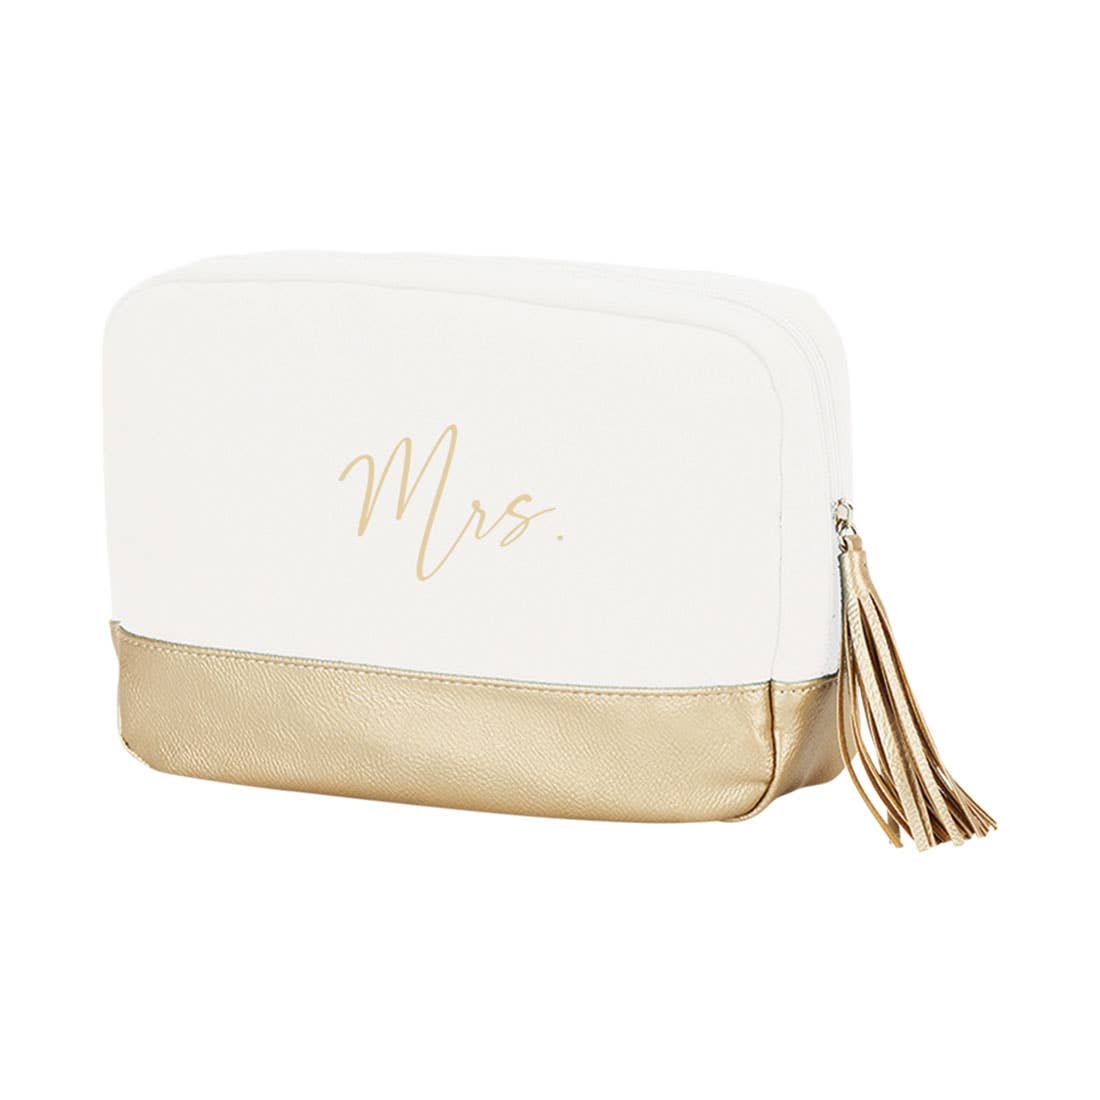 Mrs. embroidered crème cosmetic bag